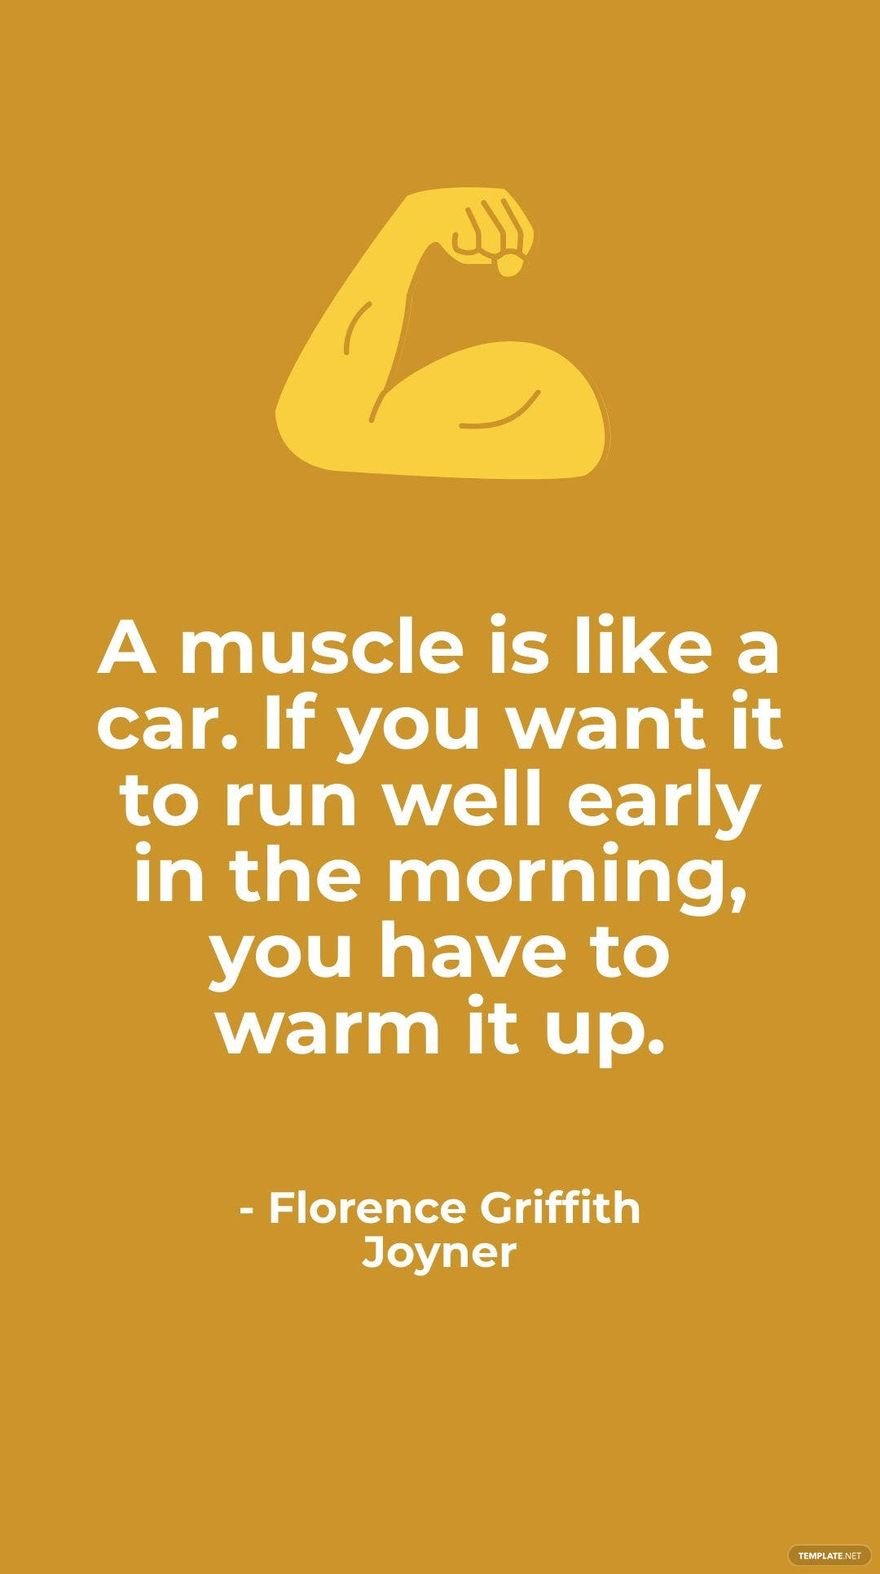 Florence Griffith Joyner - A muscle is like a car. If you want it to run well early in the morning, you have to warm it up.